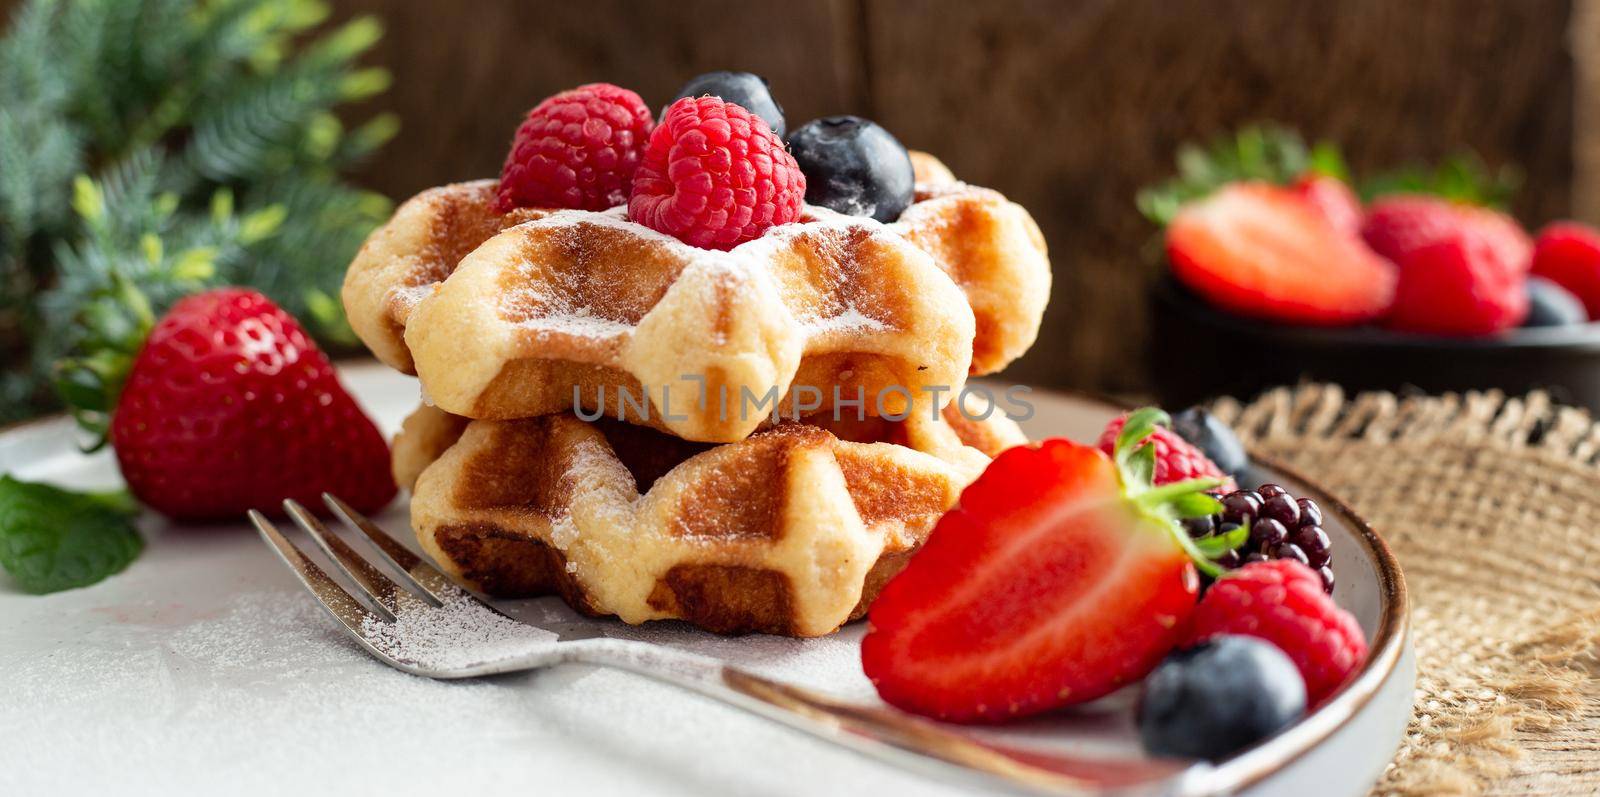 Summer health breakfast with fruits Belgian waffles on canvas. Rustic kitchen with fresh strawberries, summer breakfast with fruits